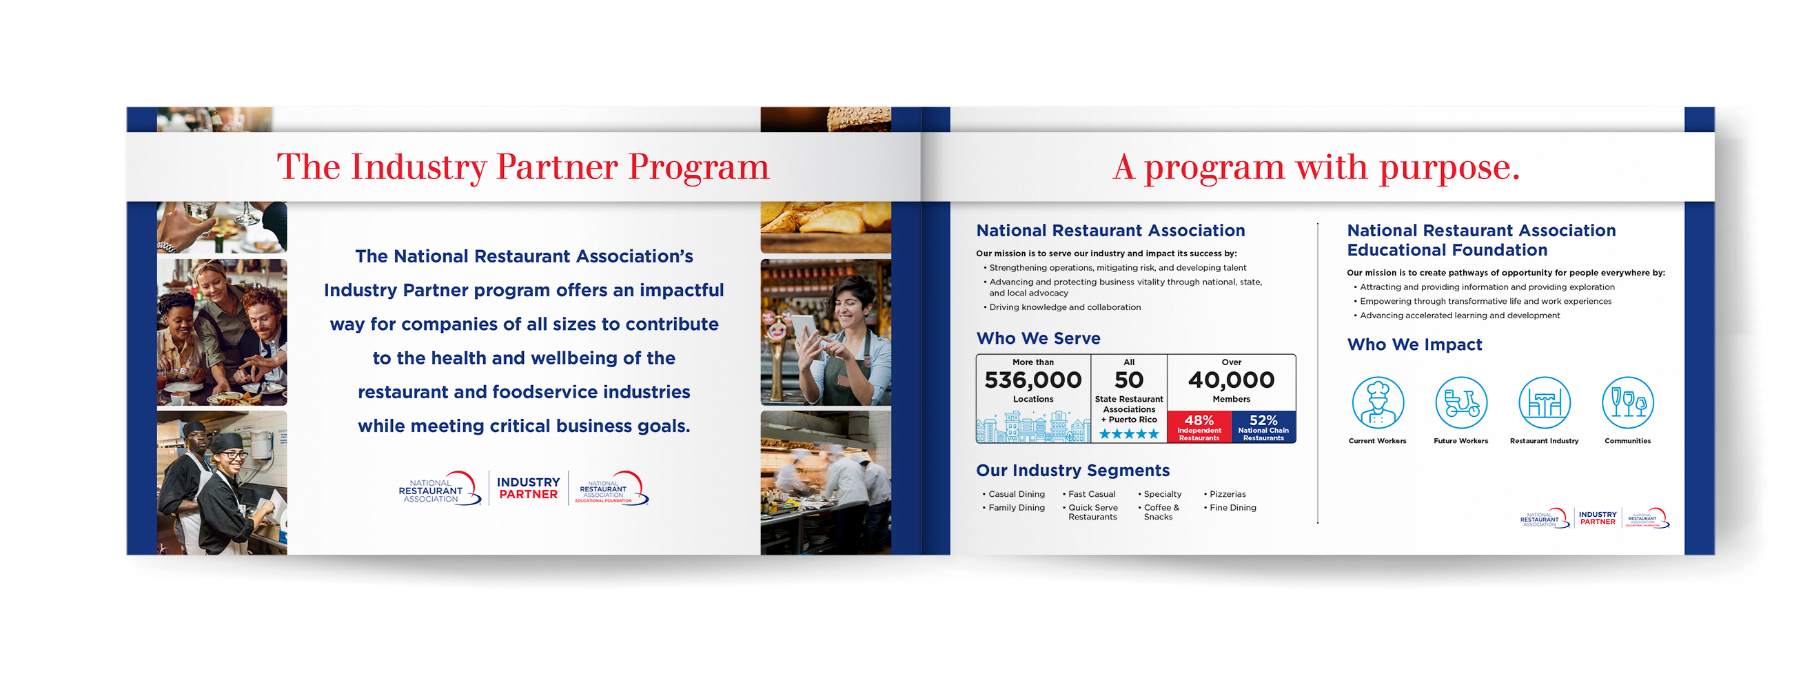 A brochure spread of the National Restaurant Association's industry partner program highlights its purpose, membership base, restaurant industry segments, and its impact on education, community, and sustainability.